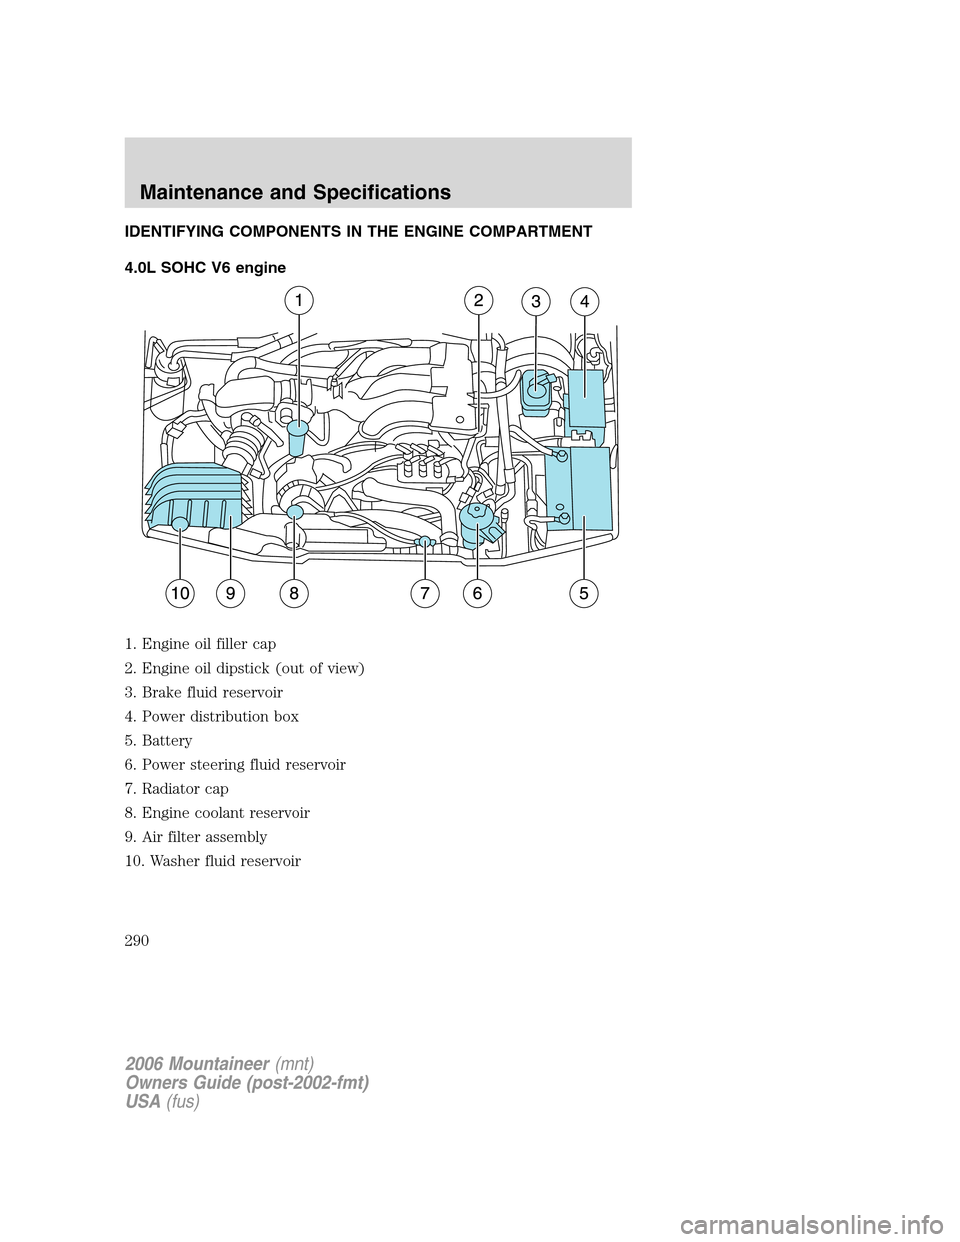 Mercury Mountaineer 2006  Owners Manuals IDENTIFYING COMPONENTS IN THE ENGINE COMPARTMENT
4.0L SOHC V6 engine
1. Engine oil filler cap
2. Engine oil dipstick (out of view)
3. Brake fluid reservoir
4. Power distribution box
5. Battery
6. Powe